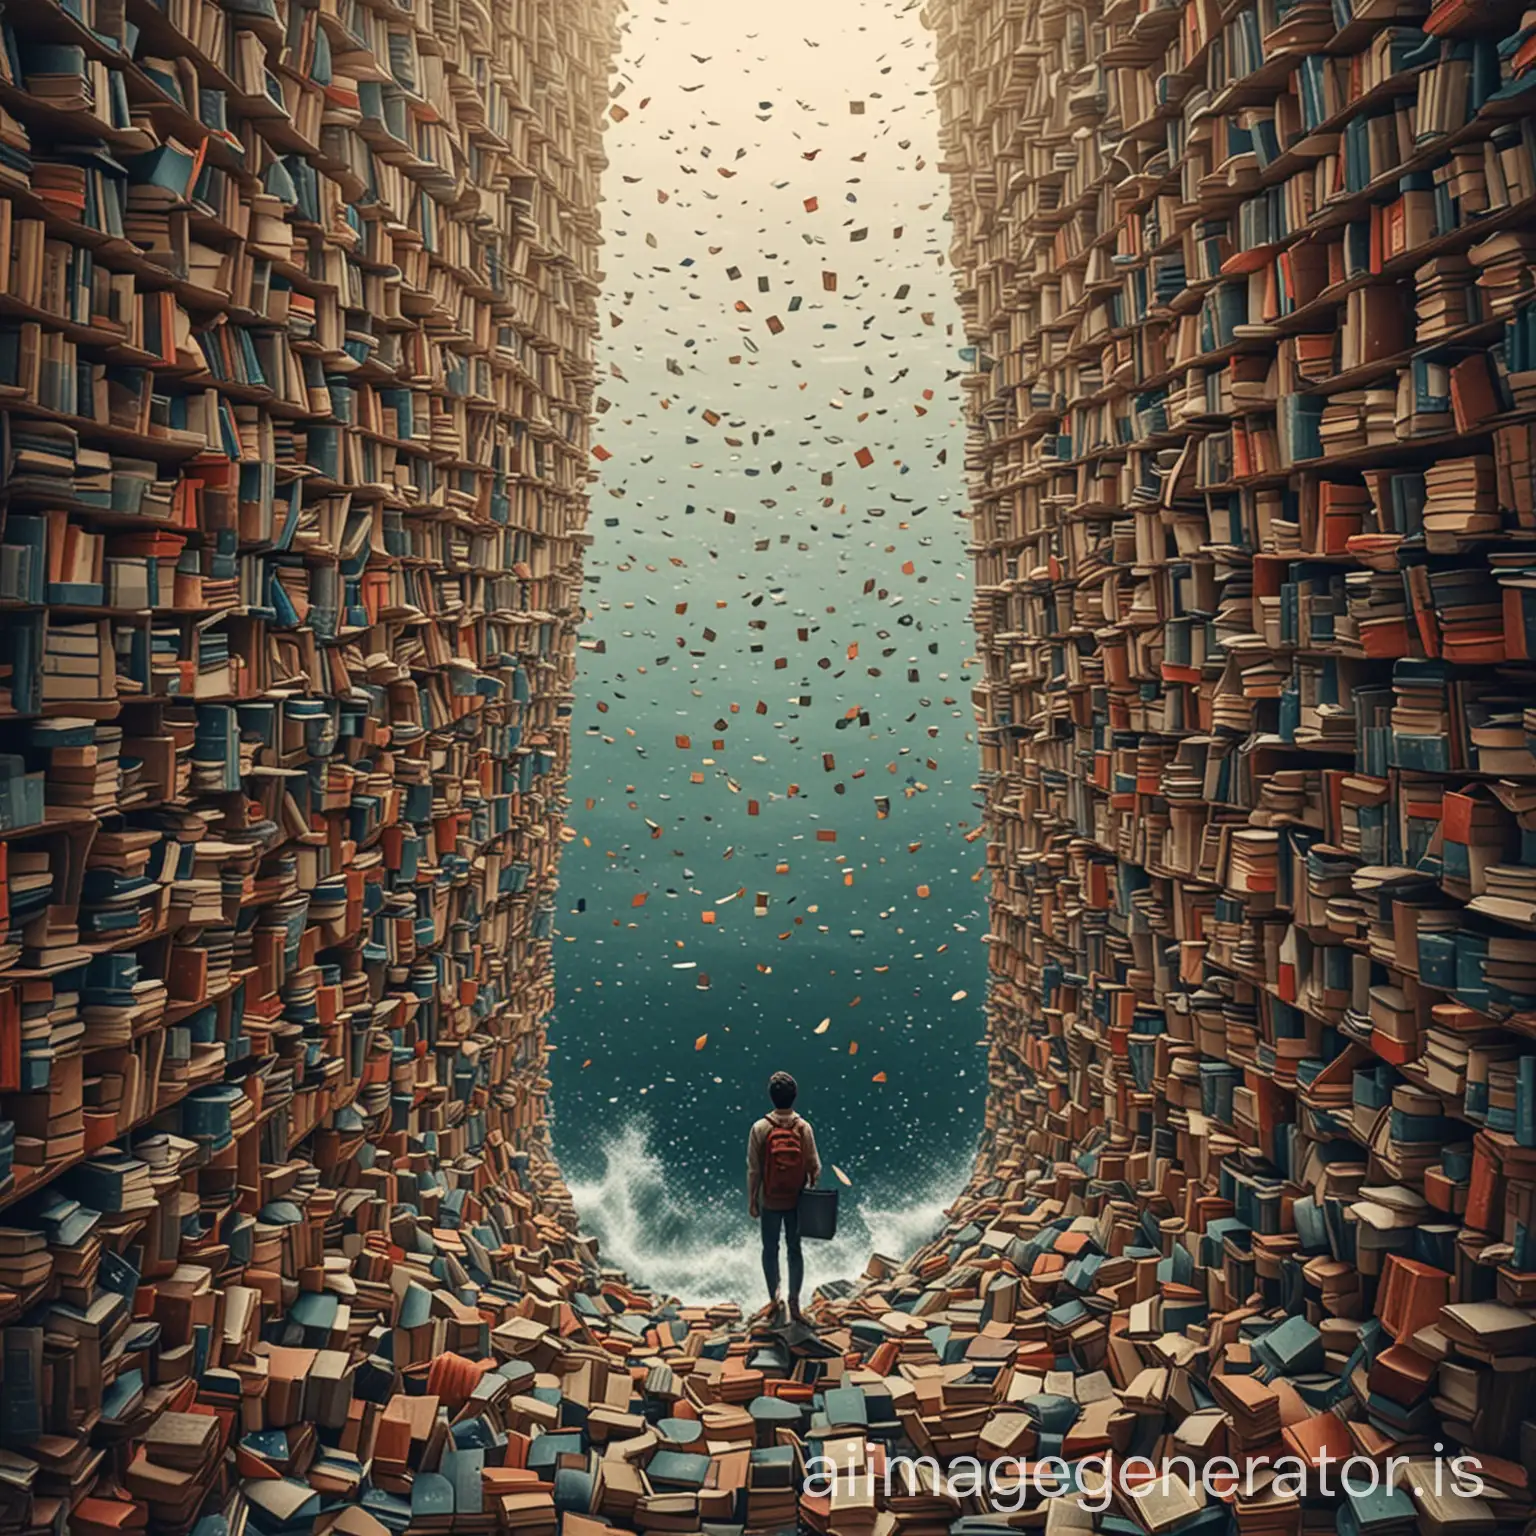 a person wandering in the sea of books